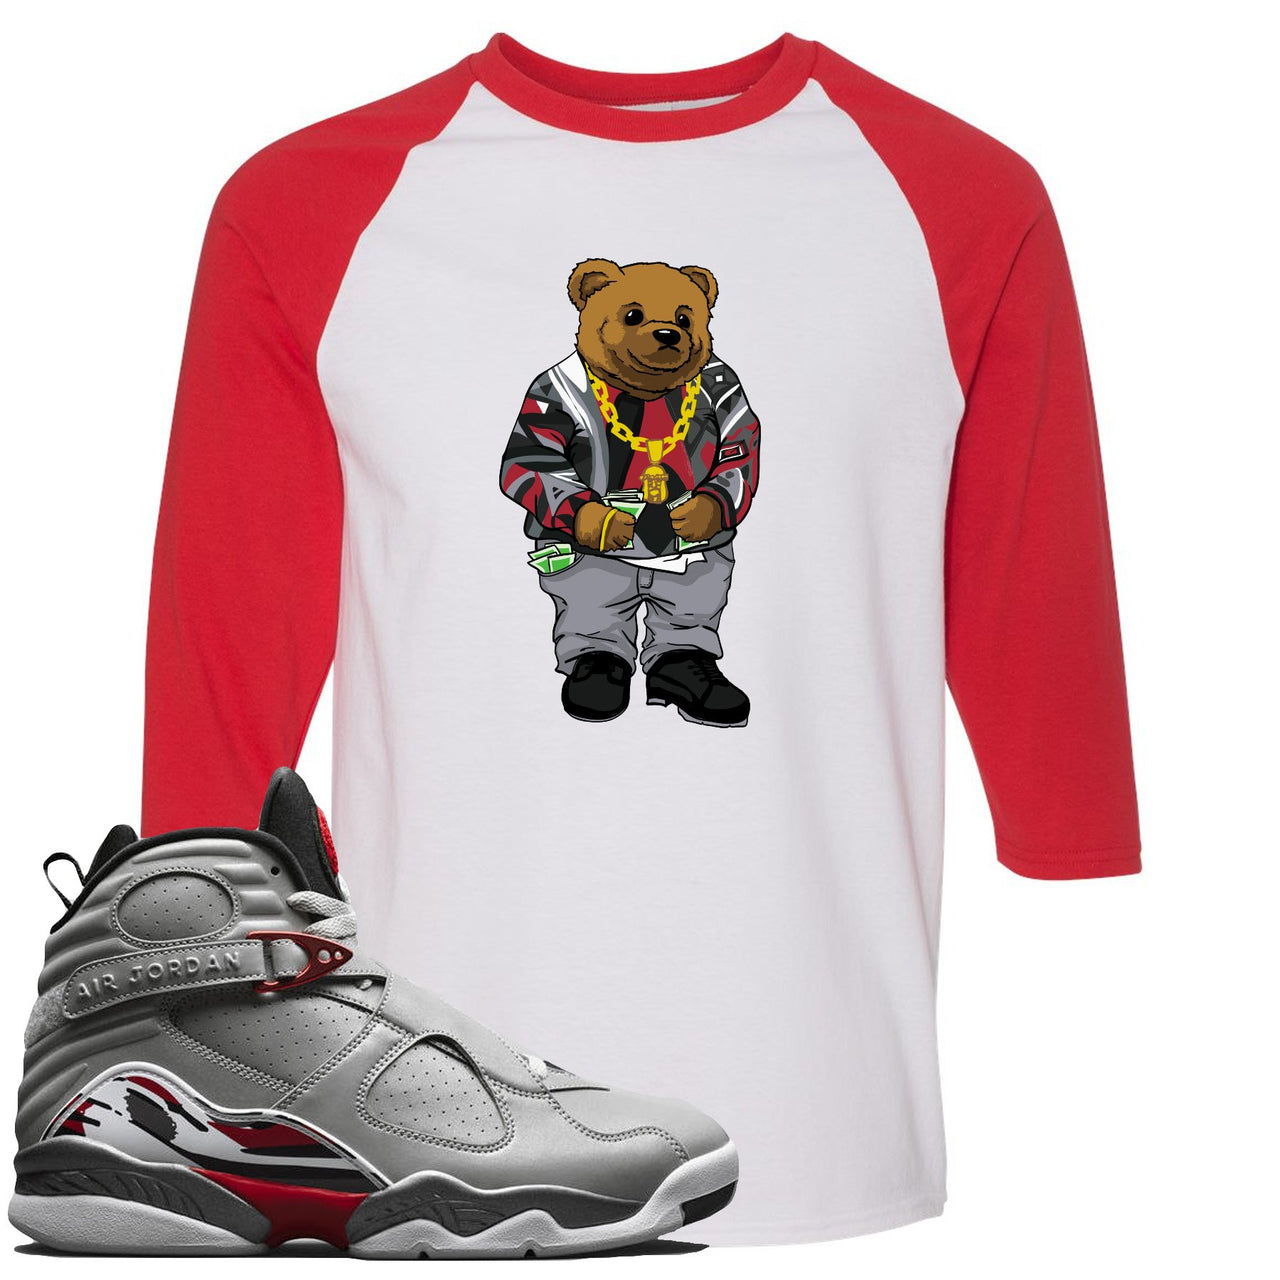 Reflections of a Champion 8s Raglan T Shirt | Sweater Bear, White and Red